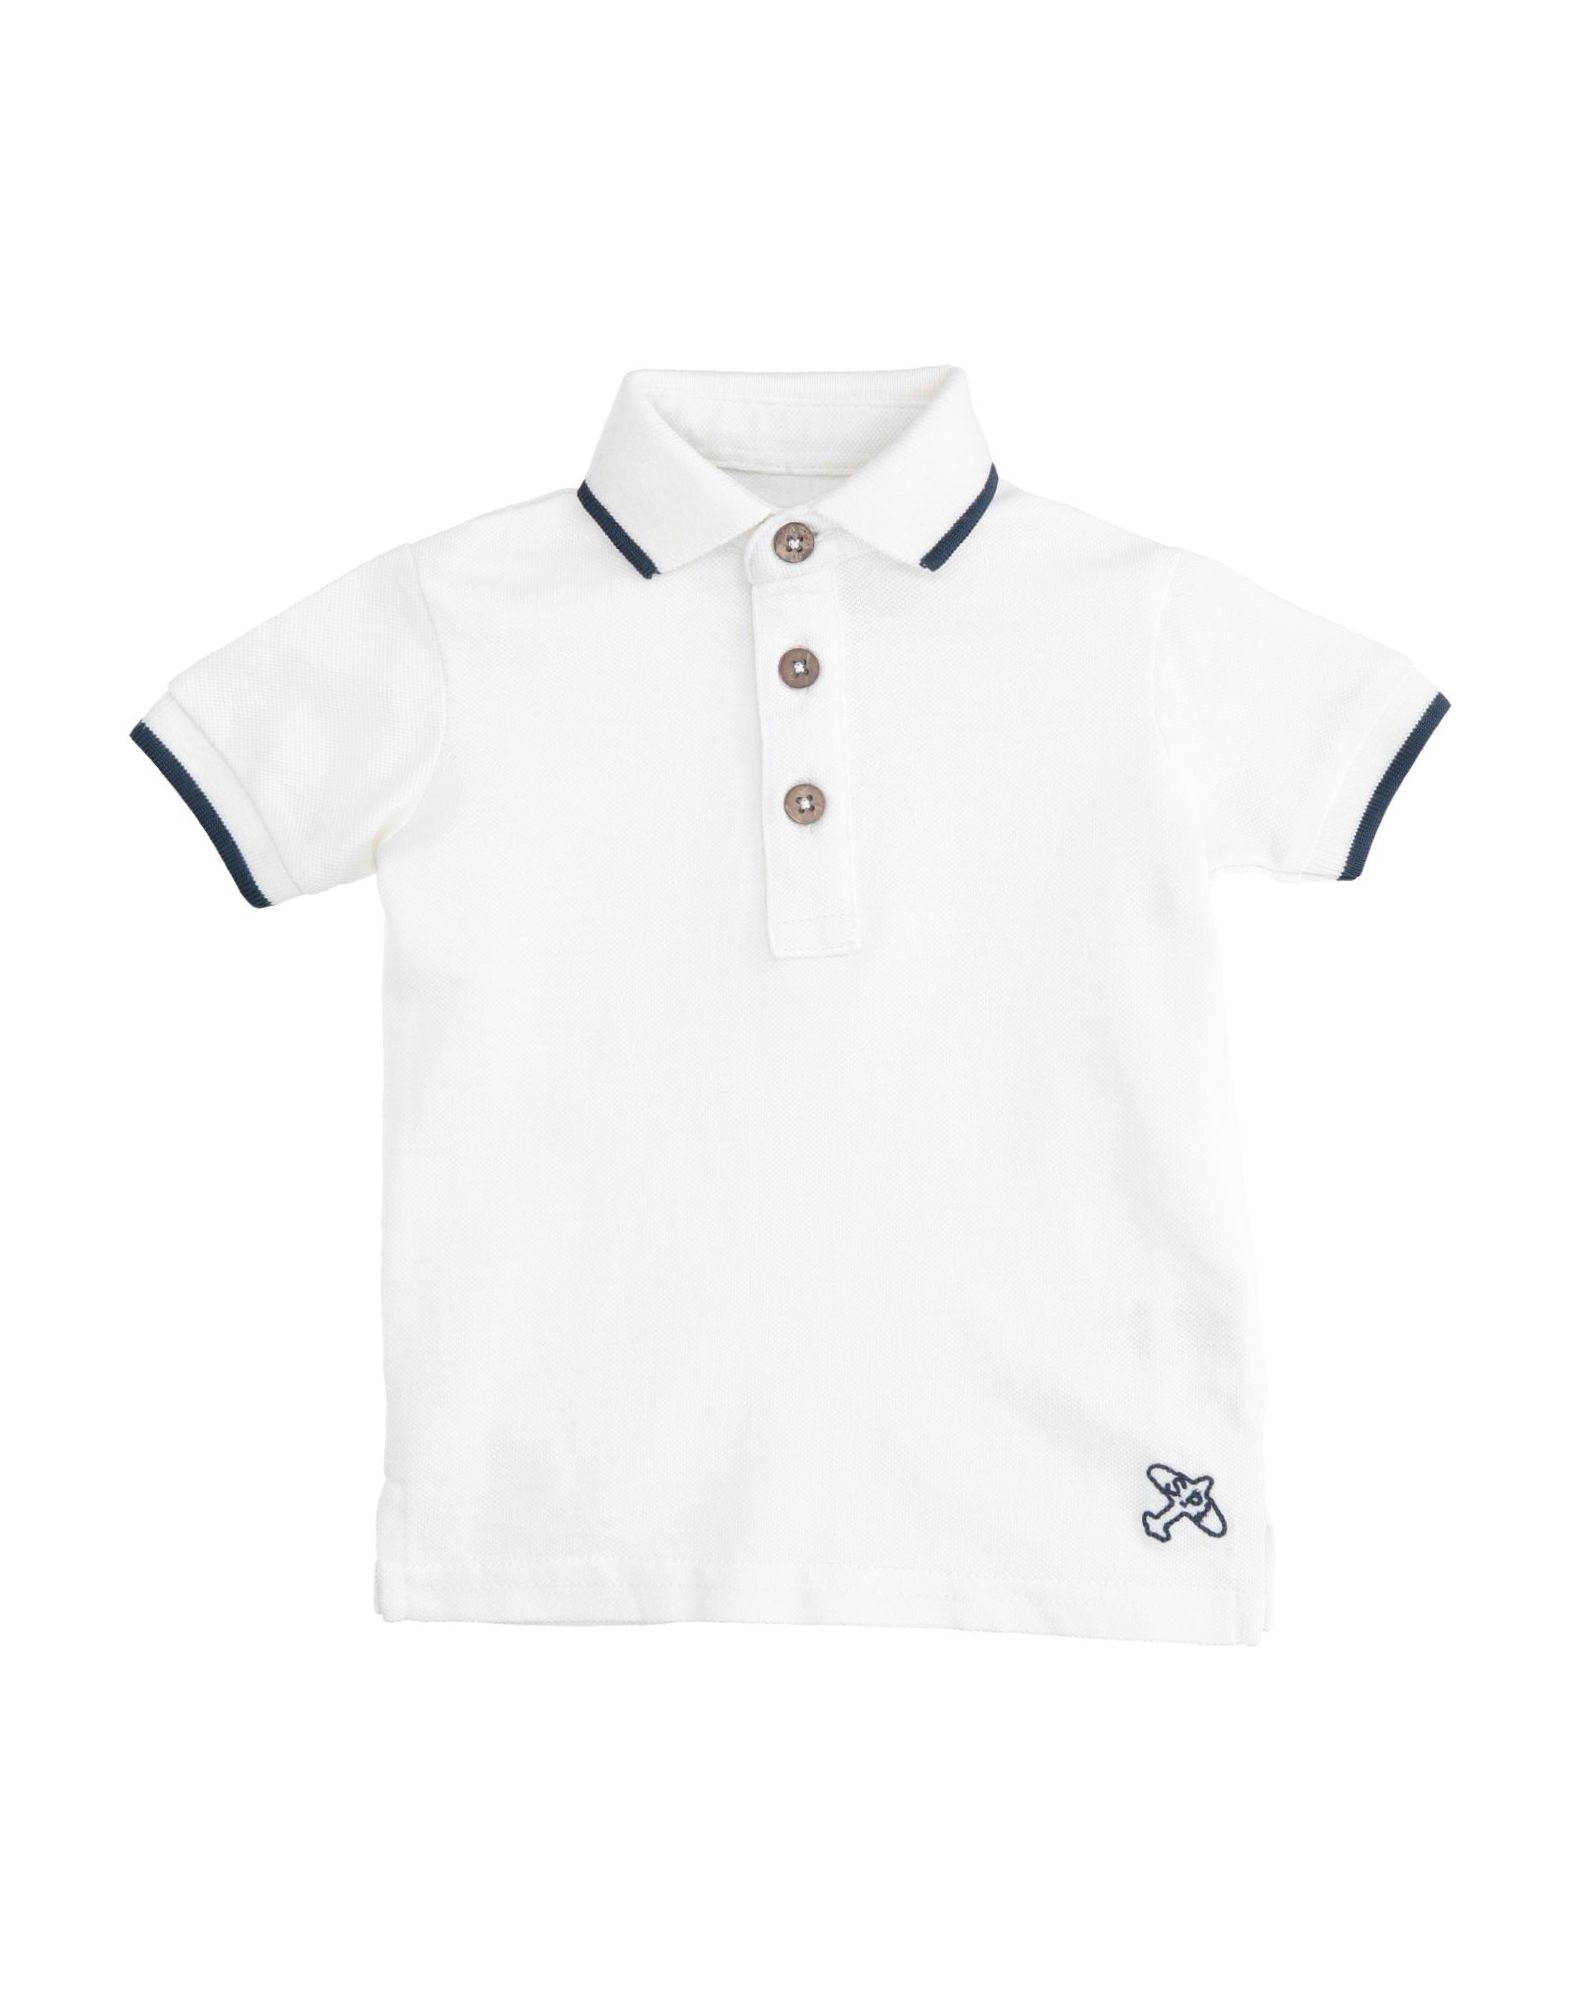 Sp1 Kids' Polo Shirts In White